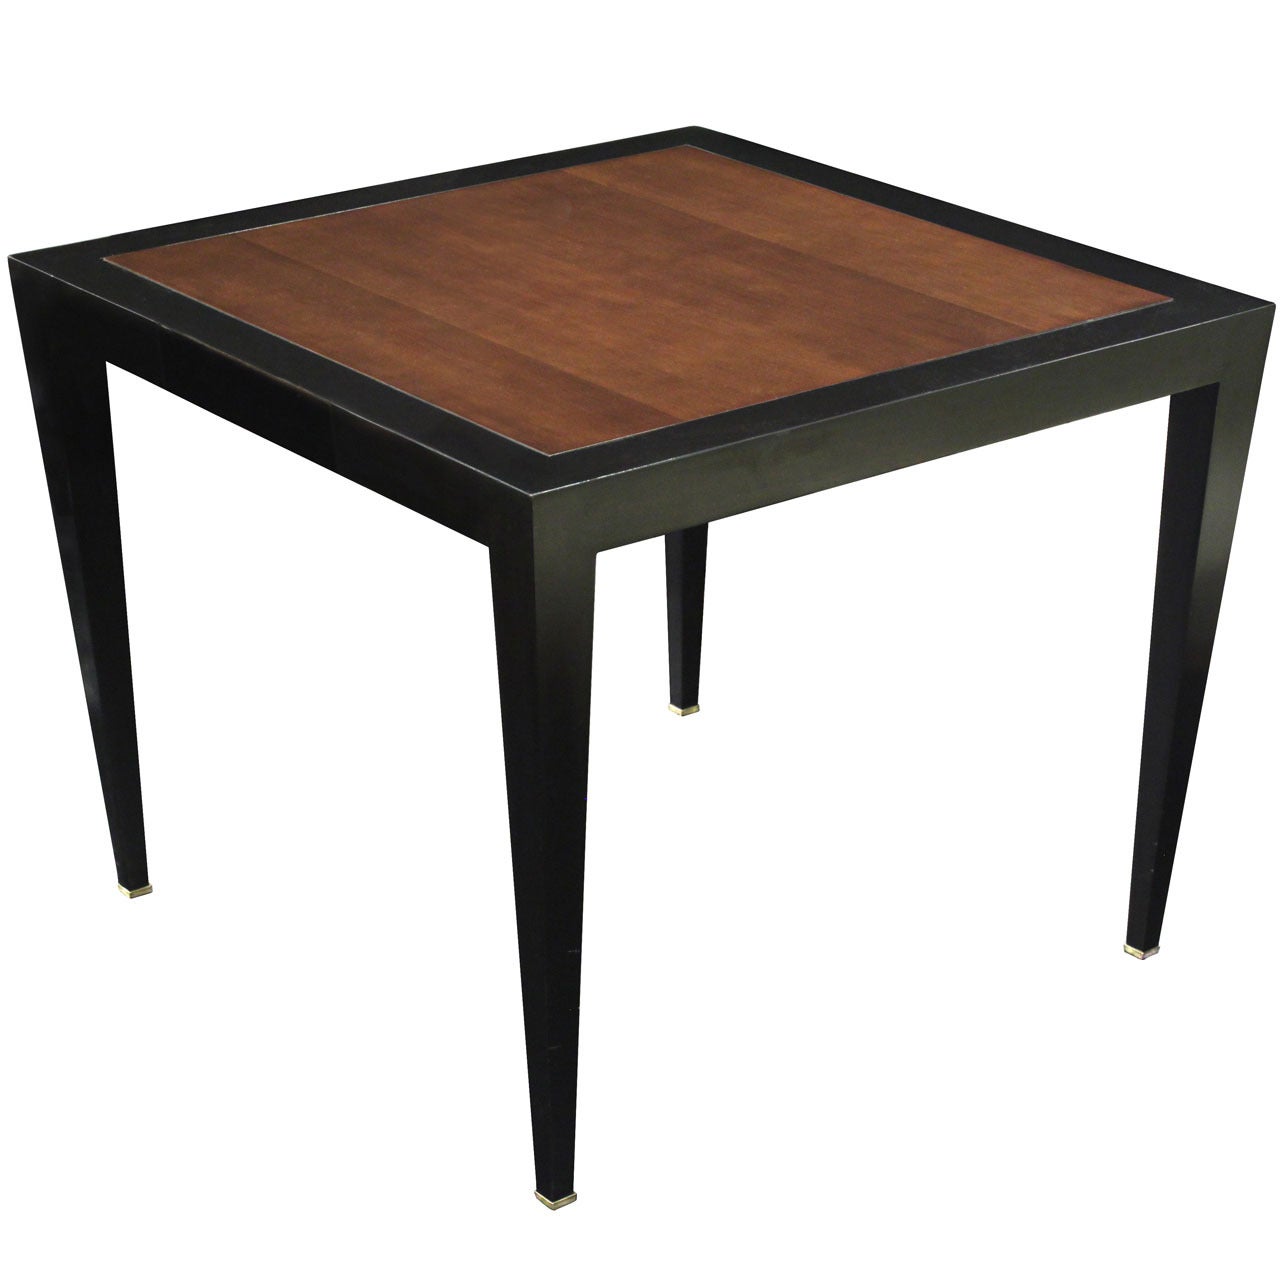 Flip-Top Game Table by Donghia